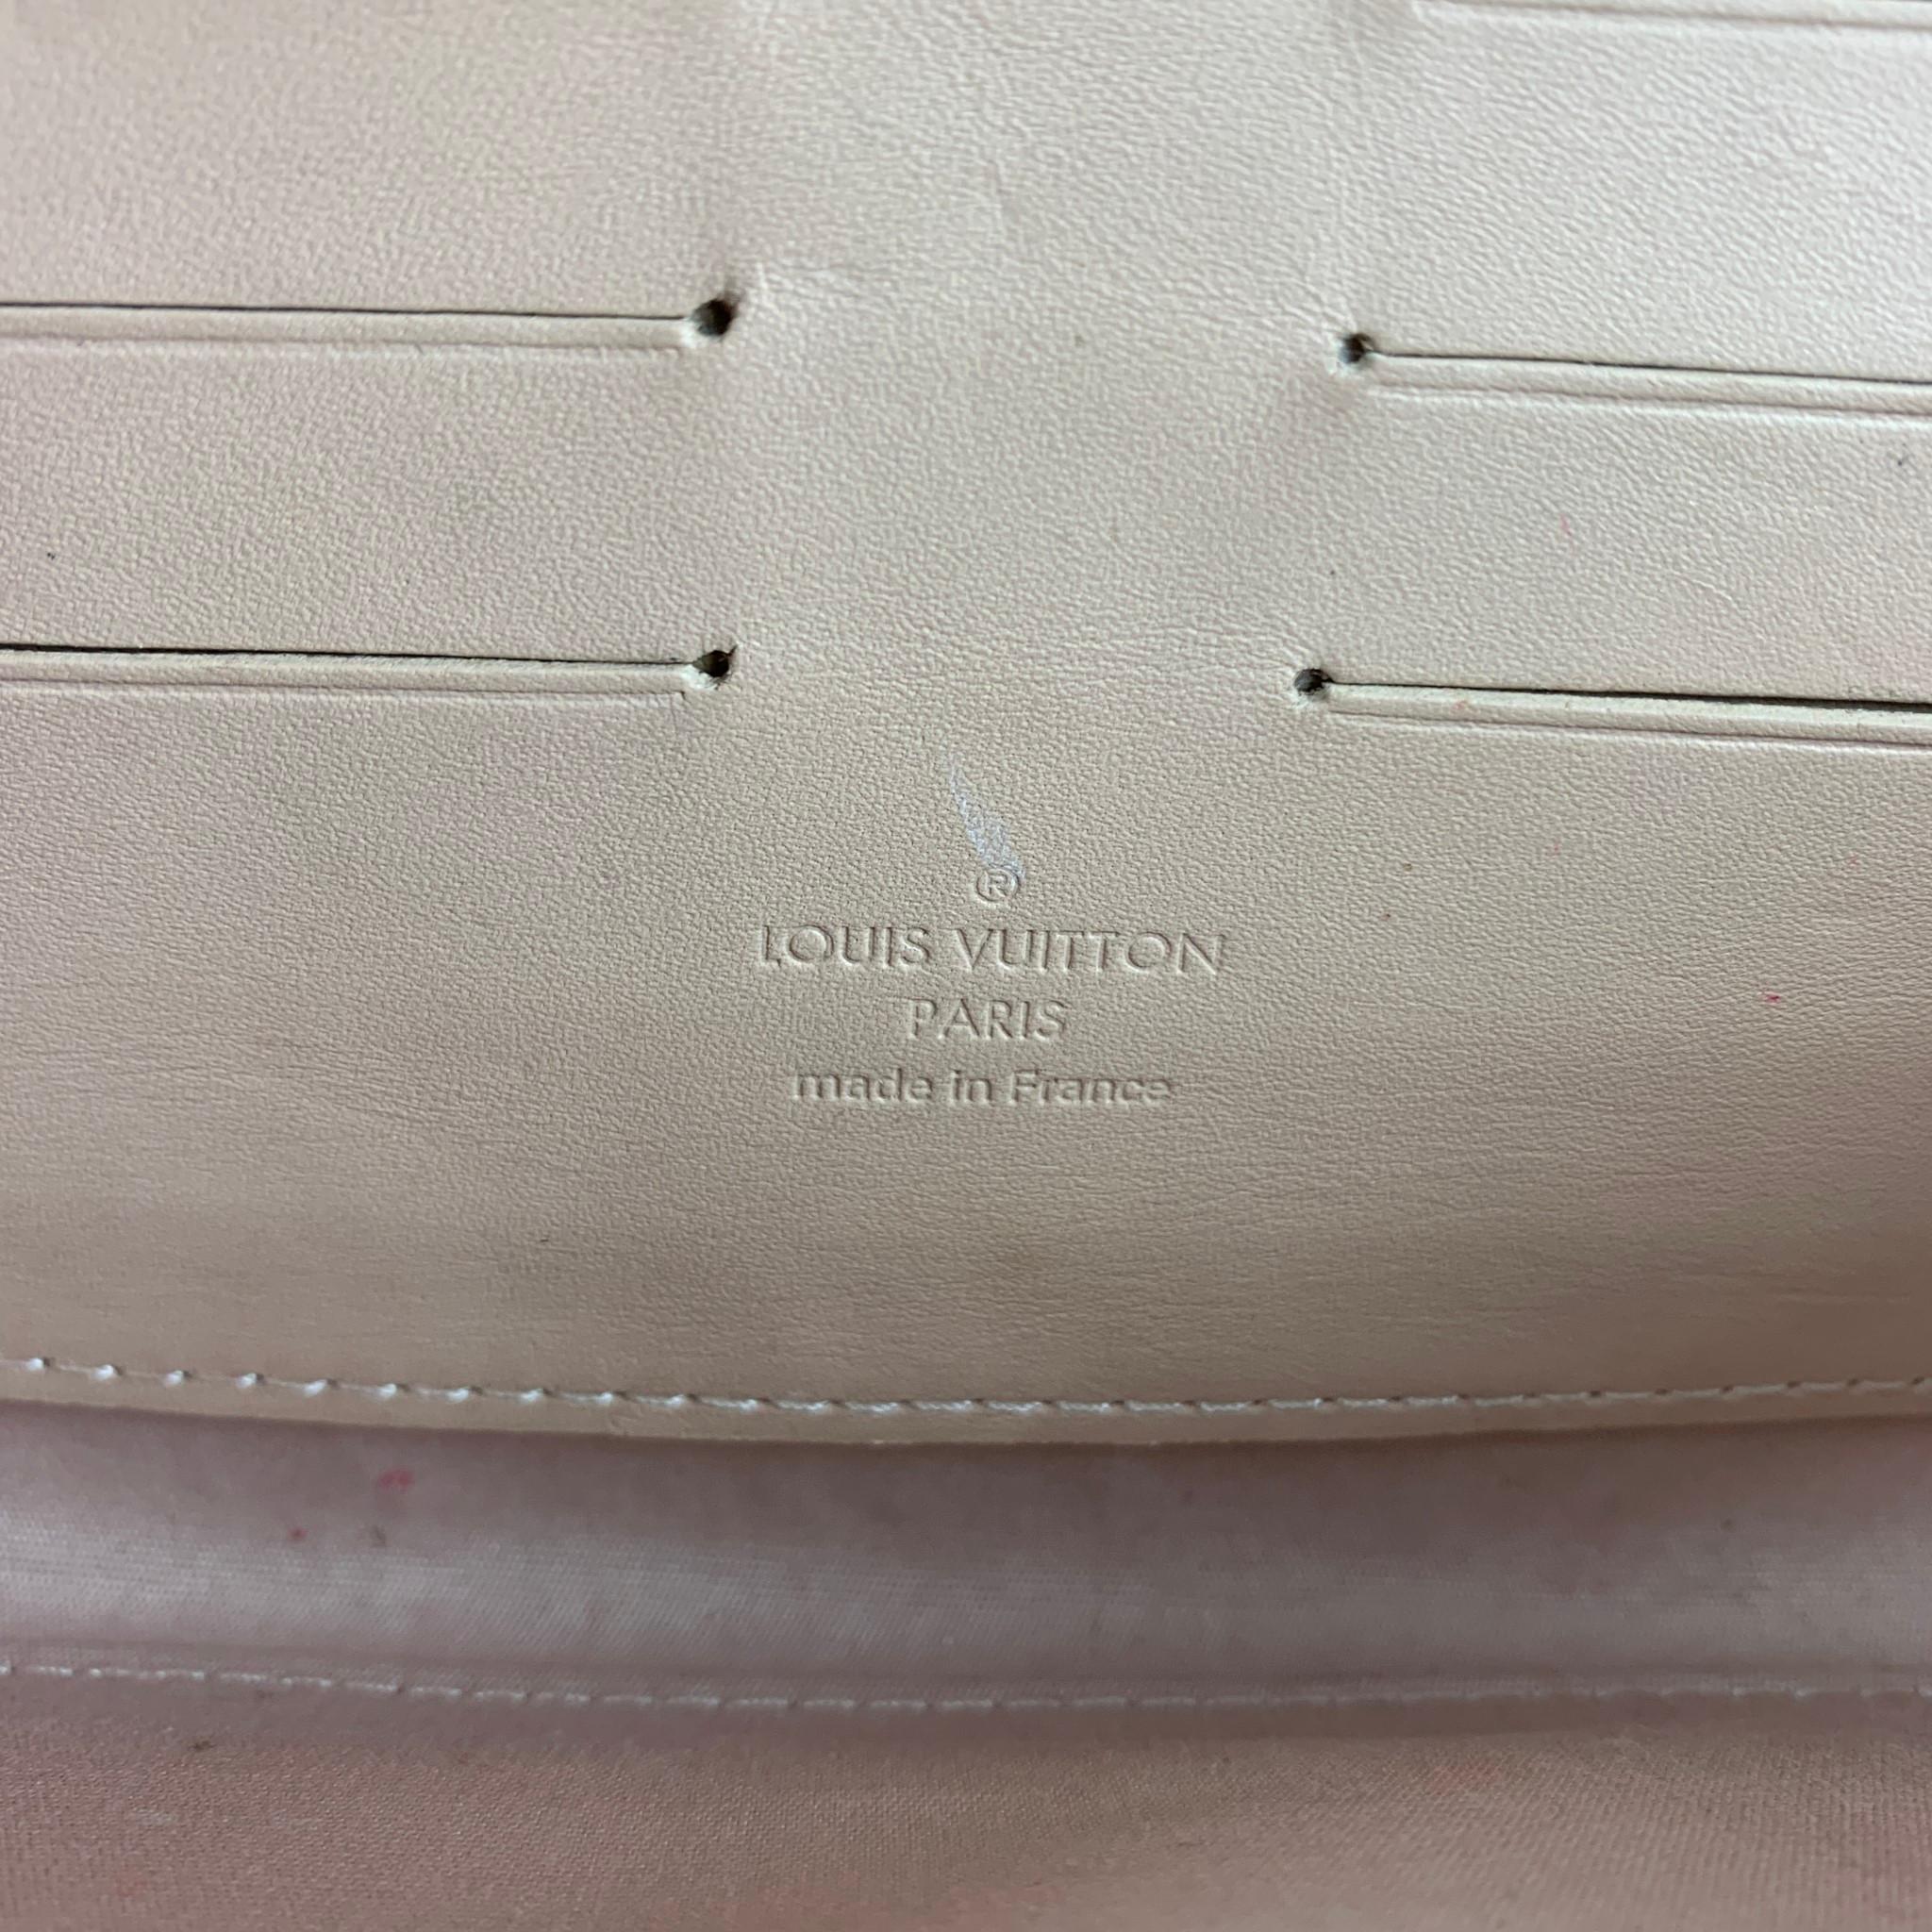 LOUIS VUITTON Vernis Sunset Blvd Beige Embossed Patent Leather Clutch 3